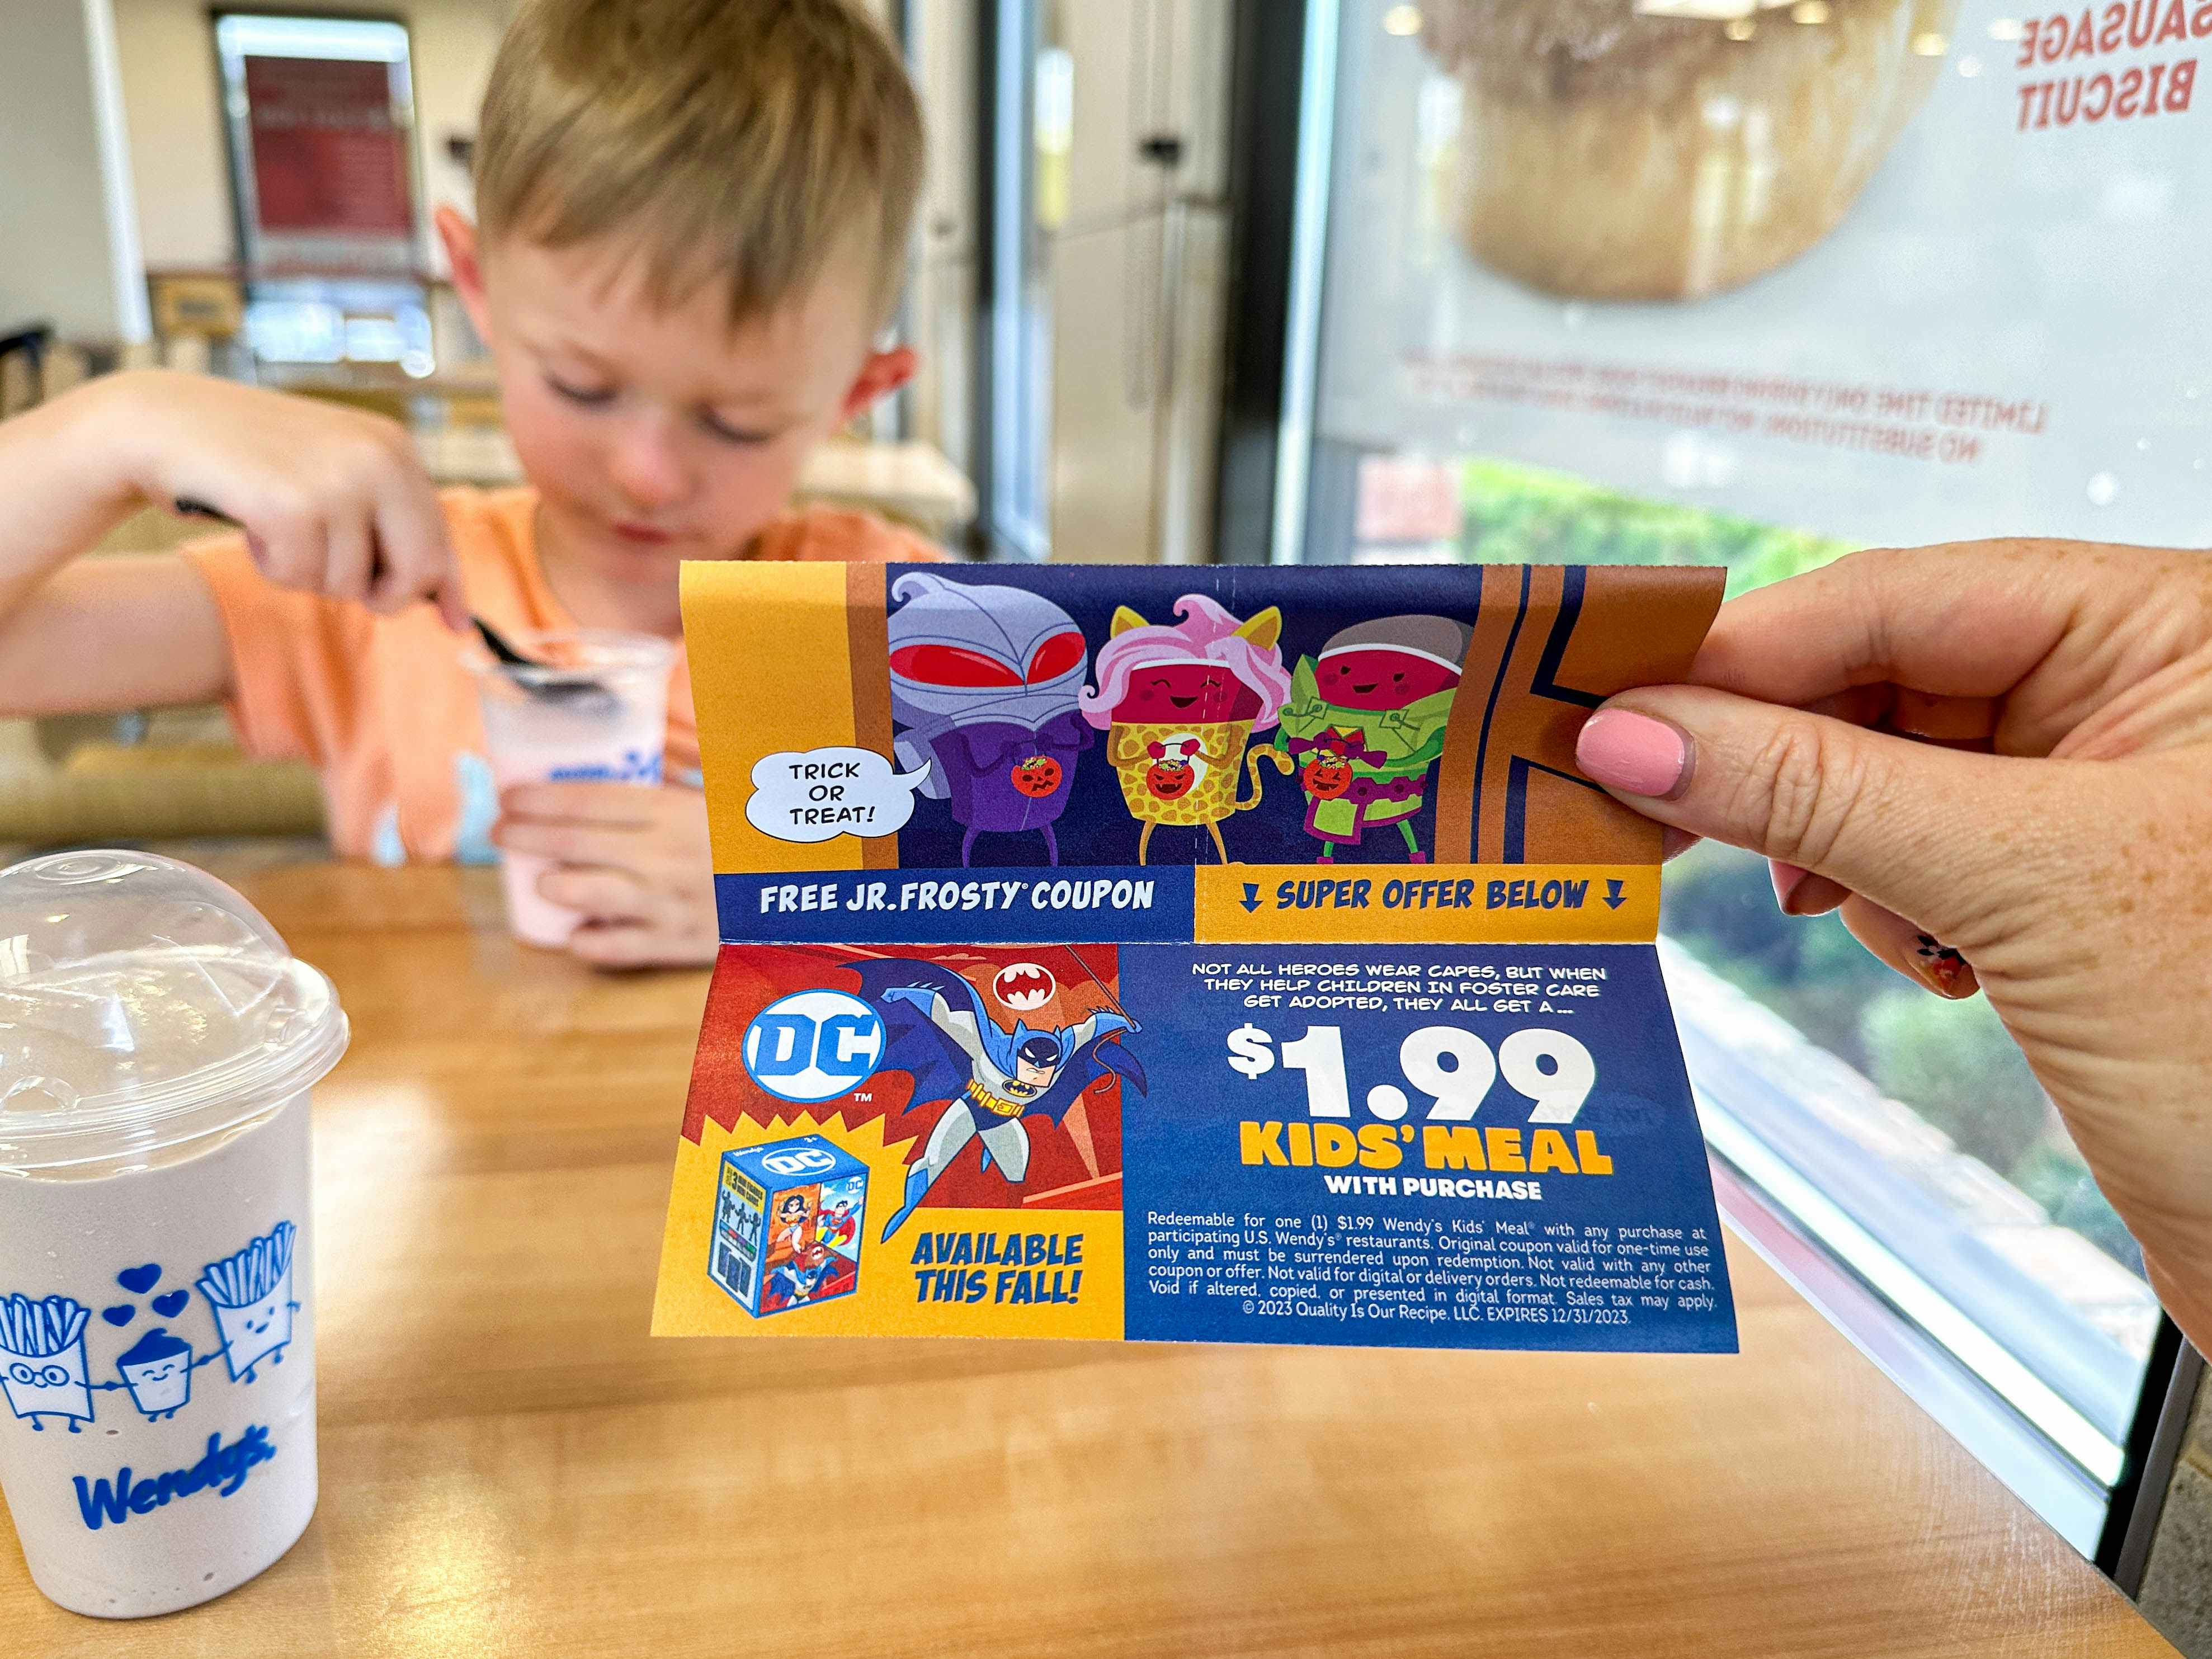 a wendys boo book coupon for discount kids meal being held in front of child eating 